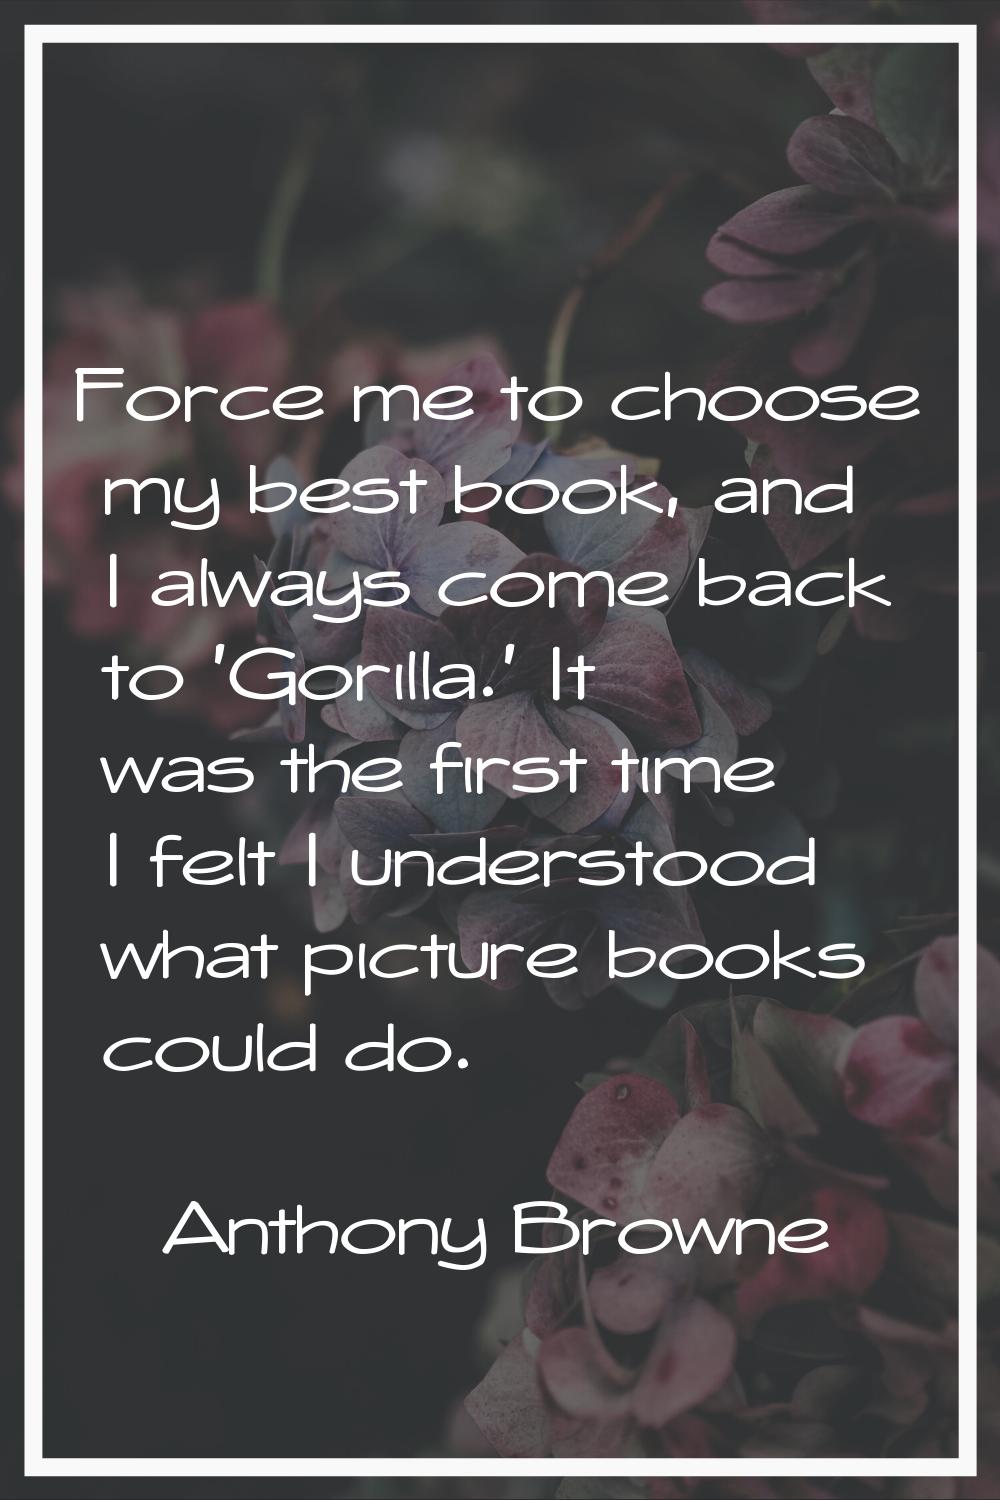 Force me to choose my best book, and I always come back to 'Gorilla.' It was the first time I felt 